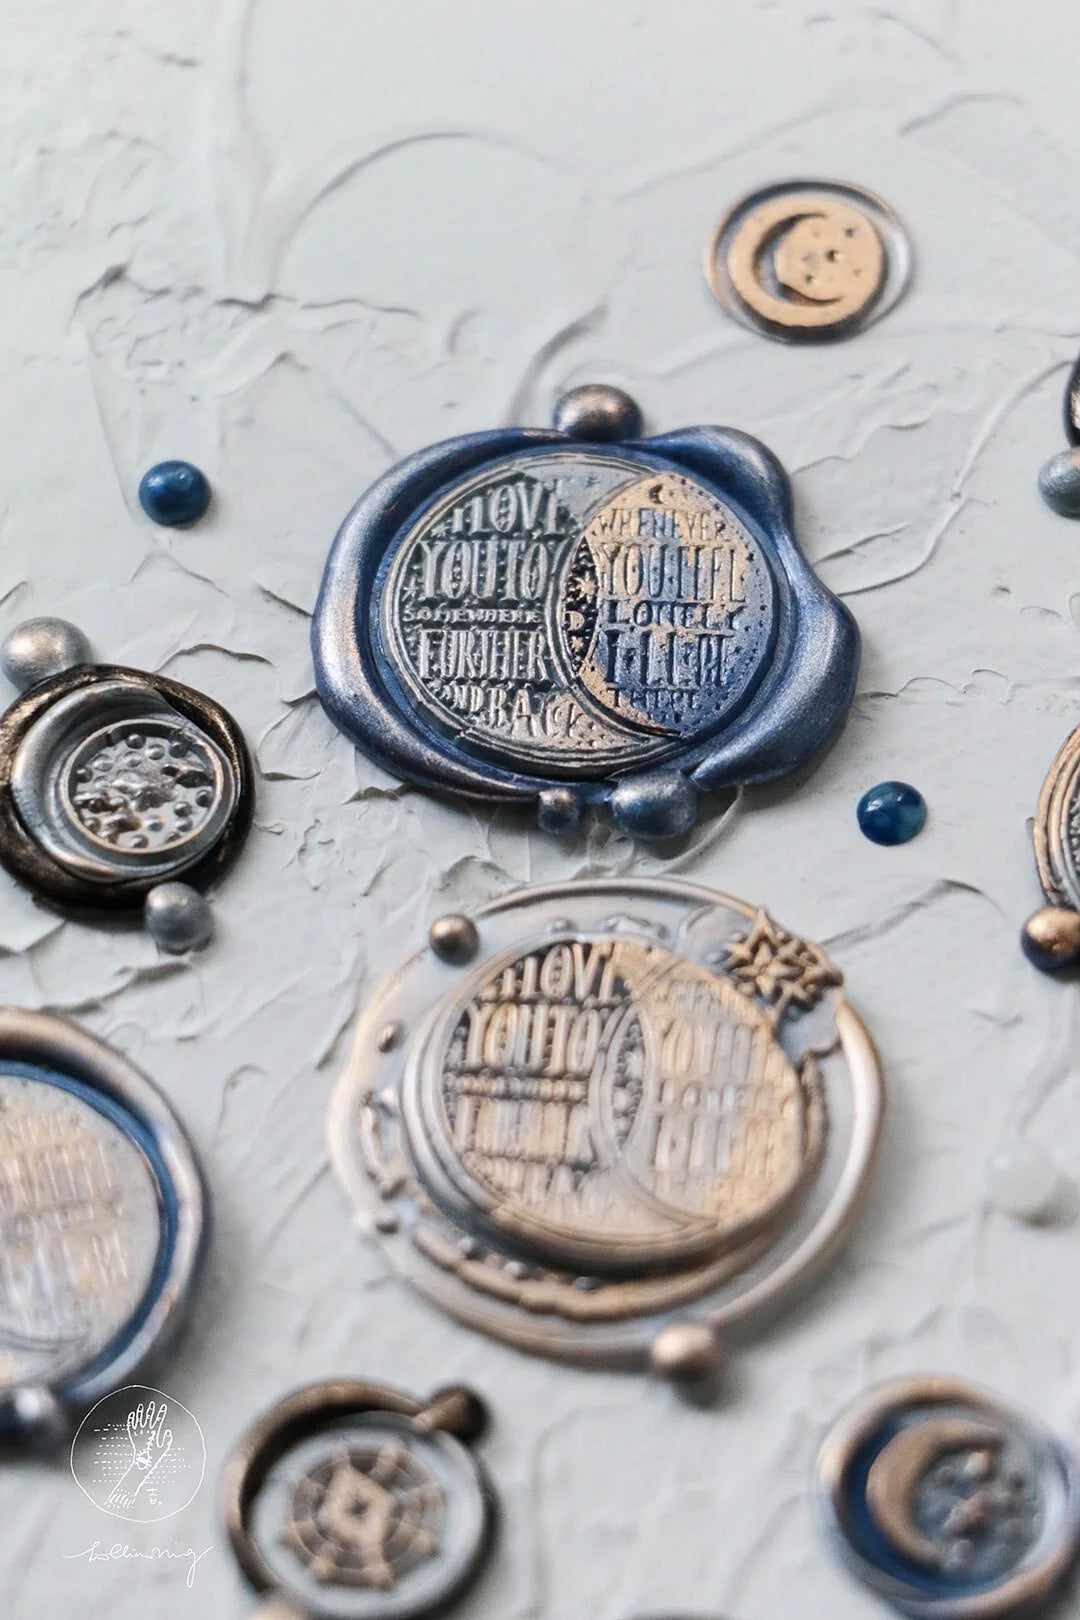 LCN Design Studio: I Love You to Somewhere Further and Back Wax Seal Stamp